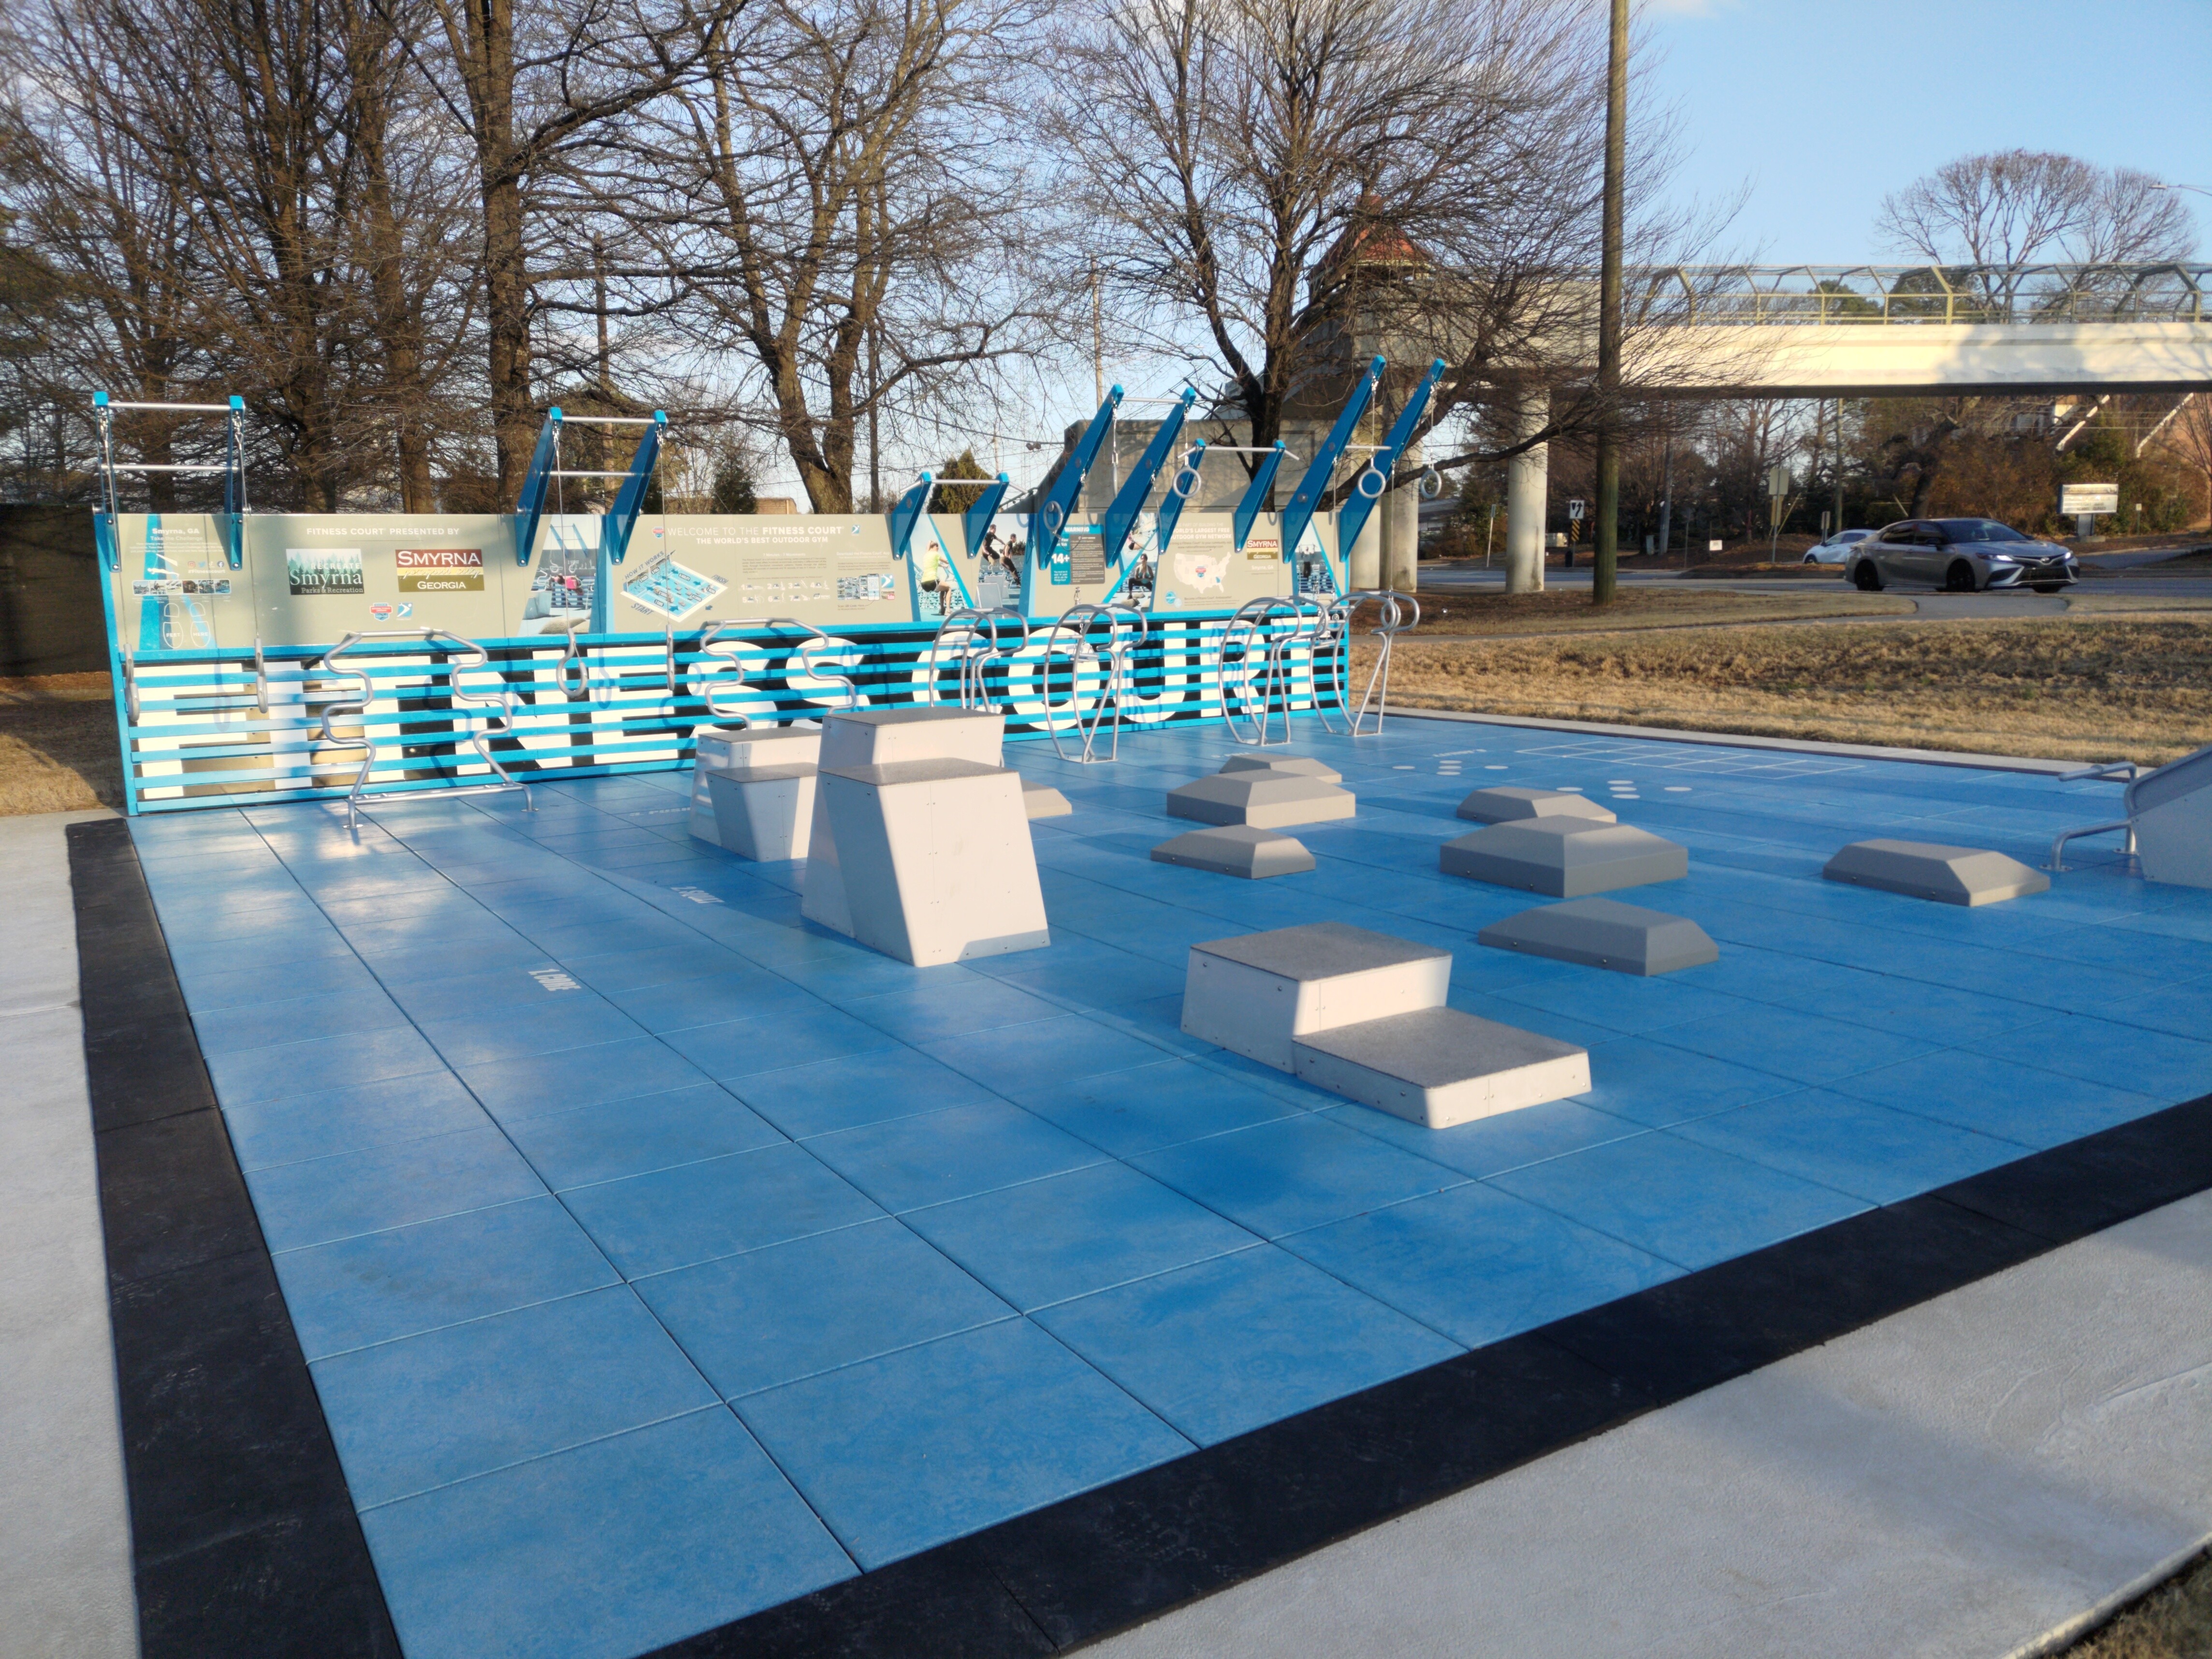 Fitness Court, a square tiled area with various stepping stones and gym equipment